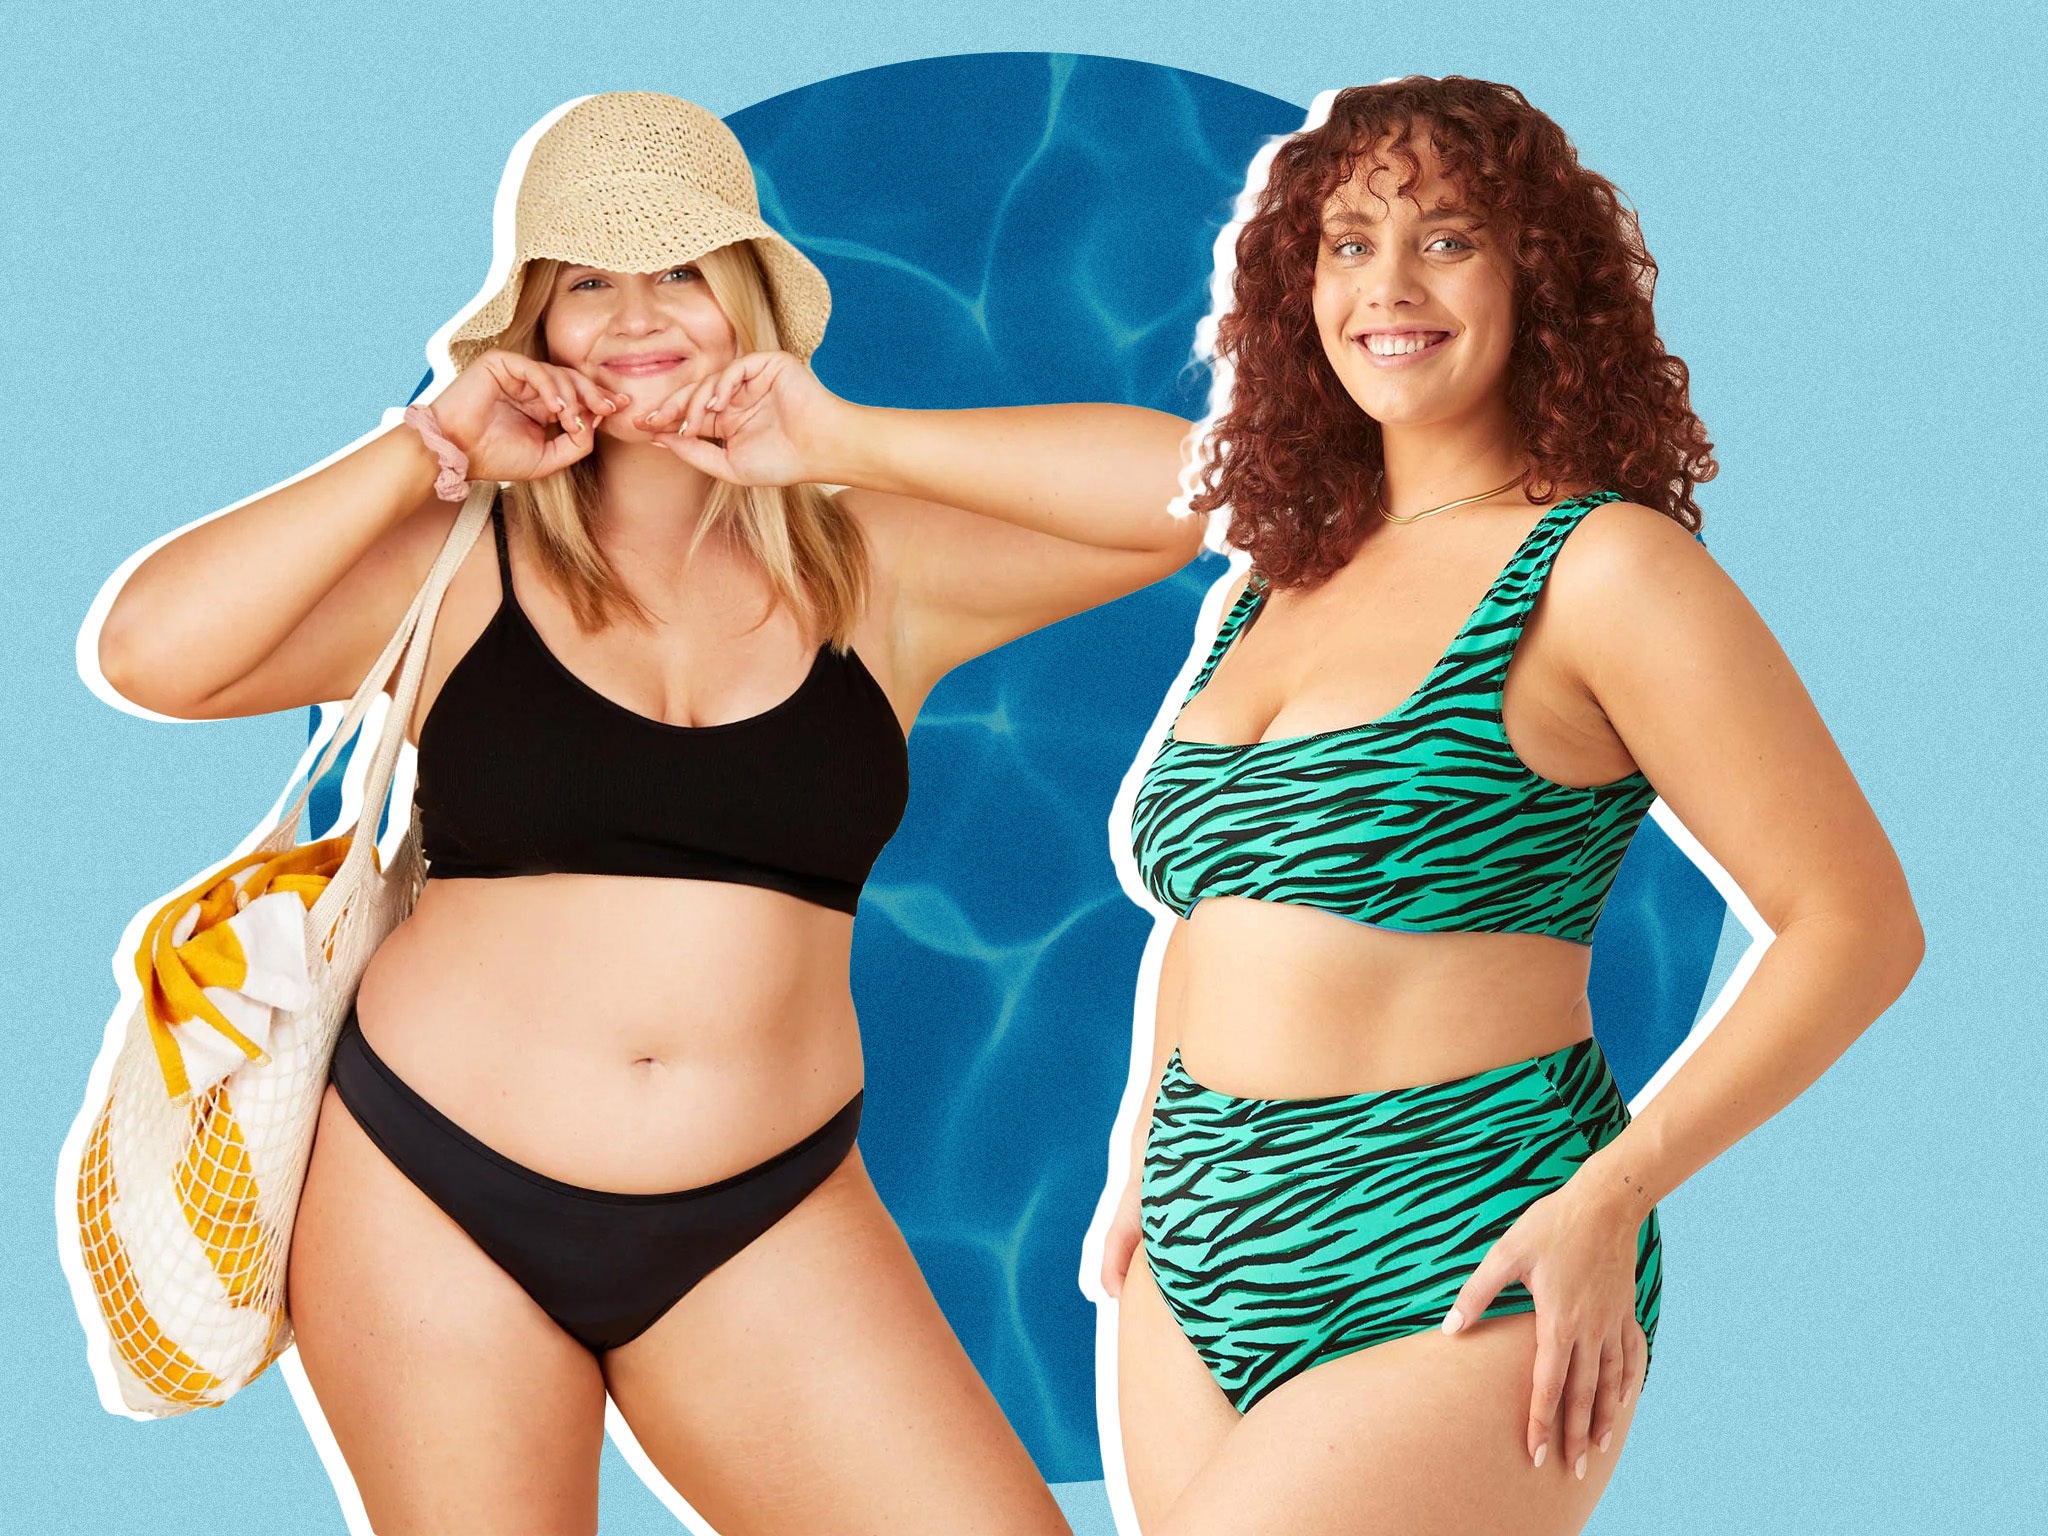 Swimmers or Bathers? Swimwear Terms Ranked